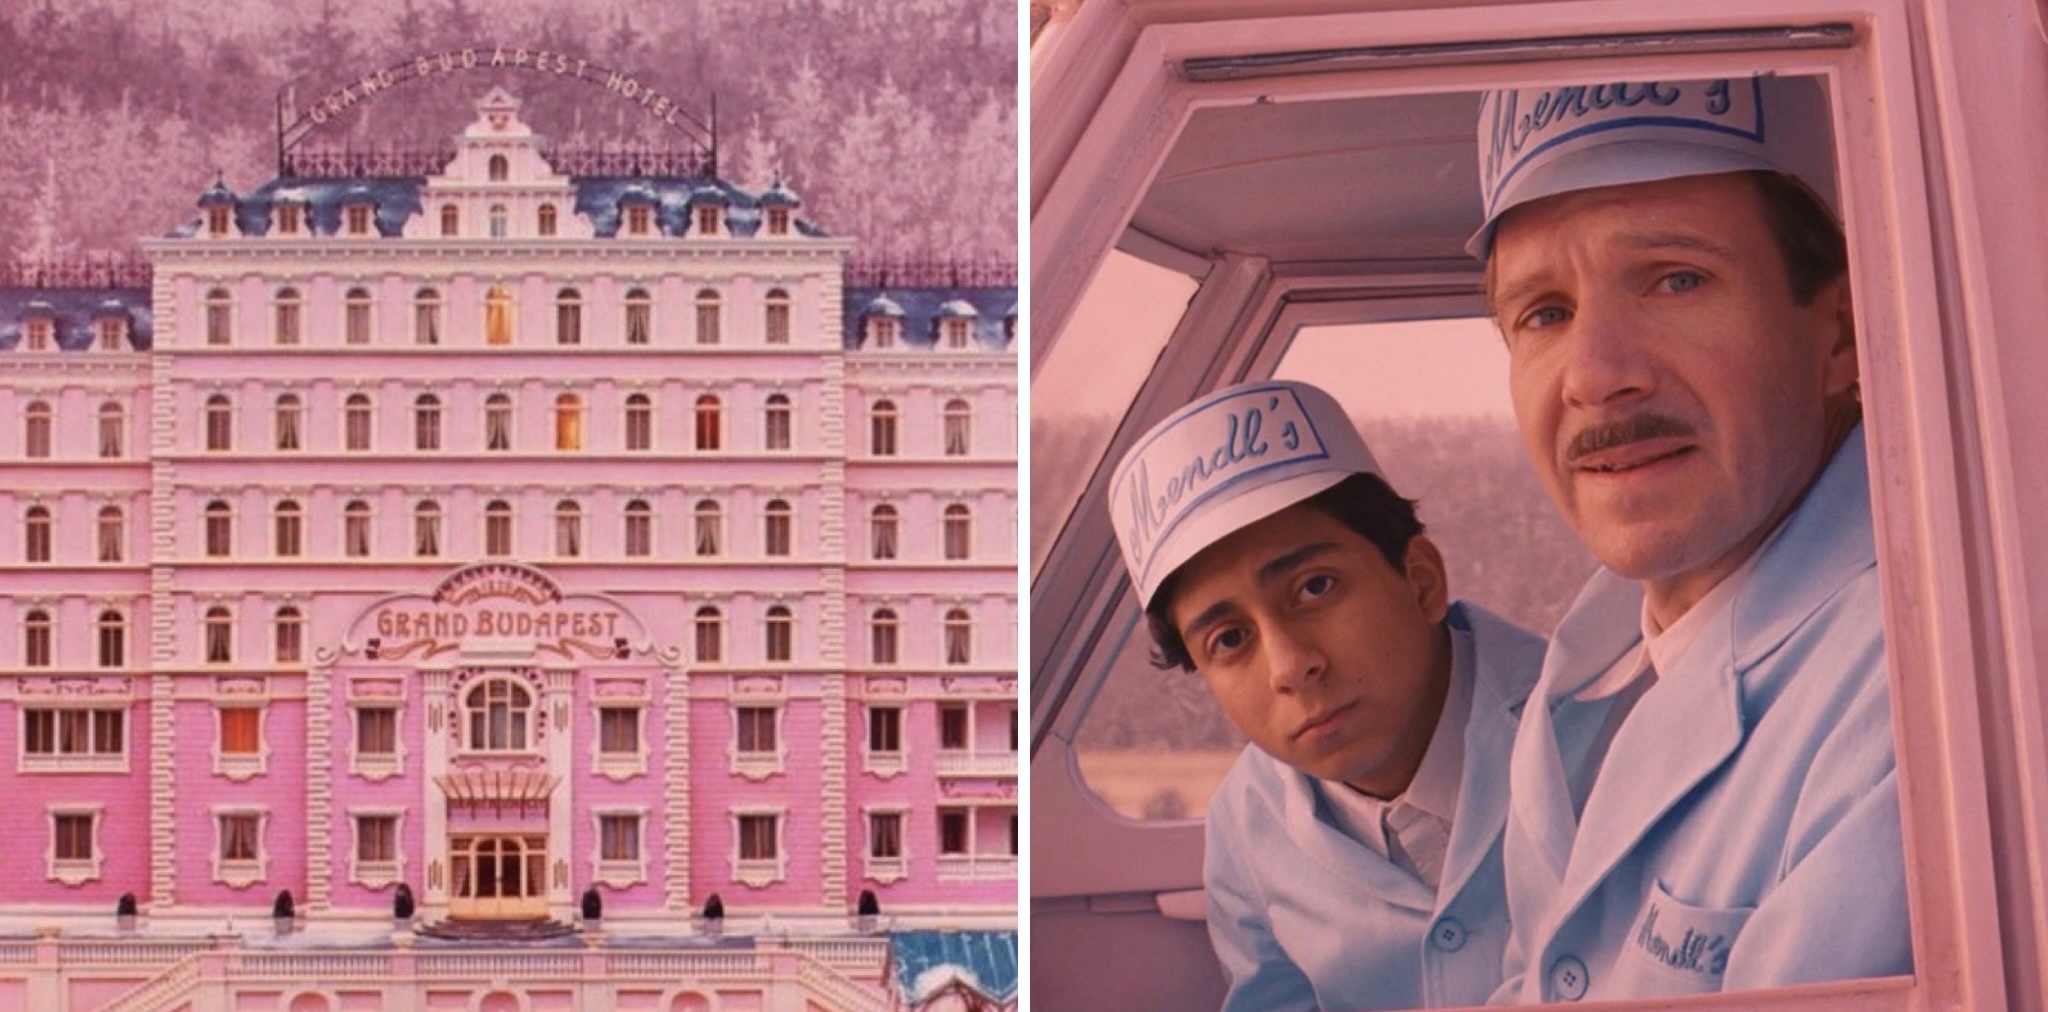 The Grand Budapest Hotel Montreal